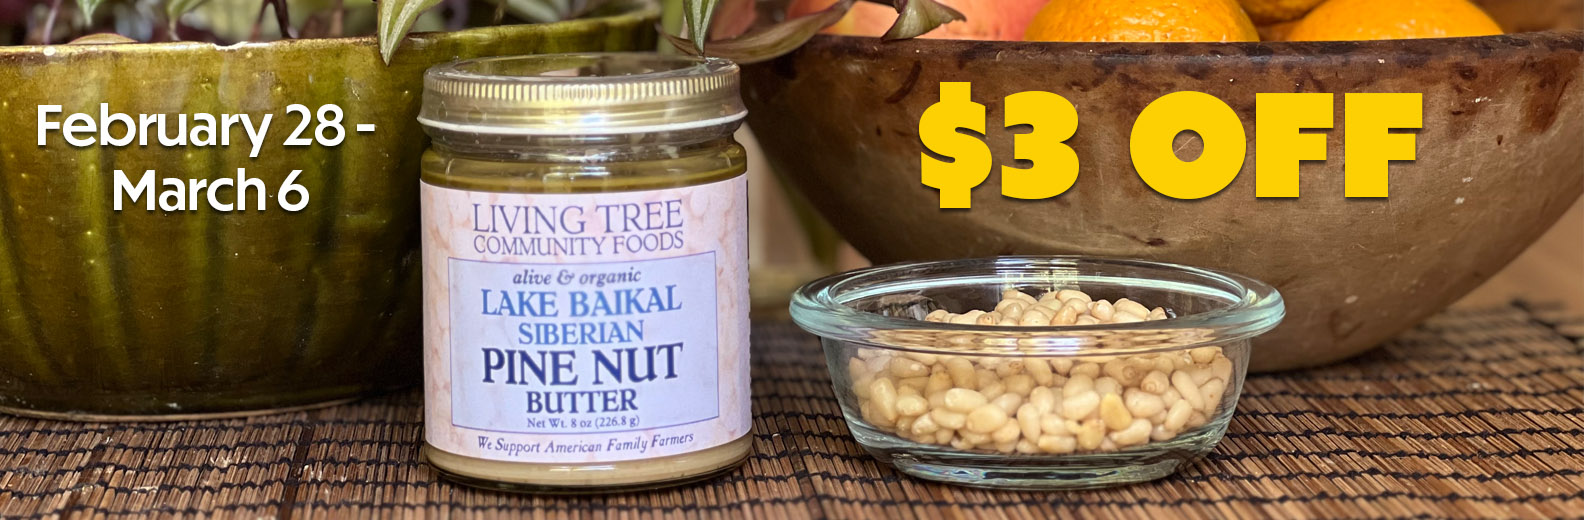 Pine Nut Butter Weekly Sale Banner